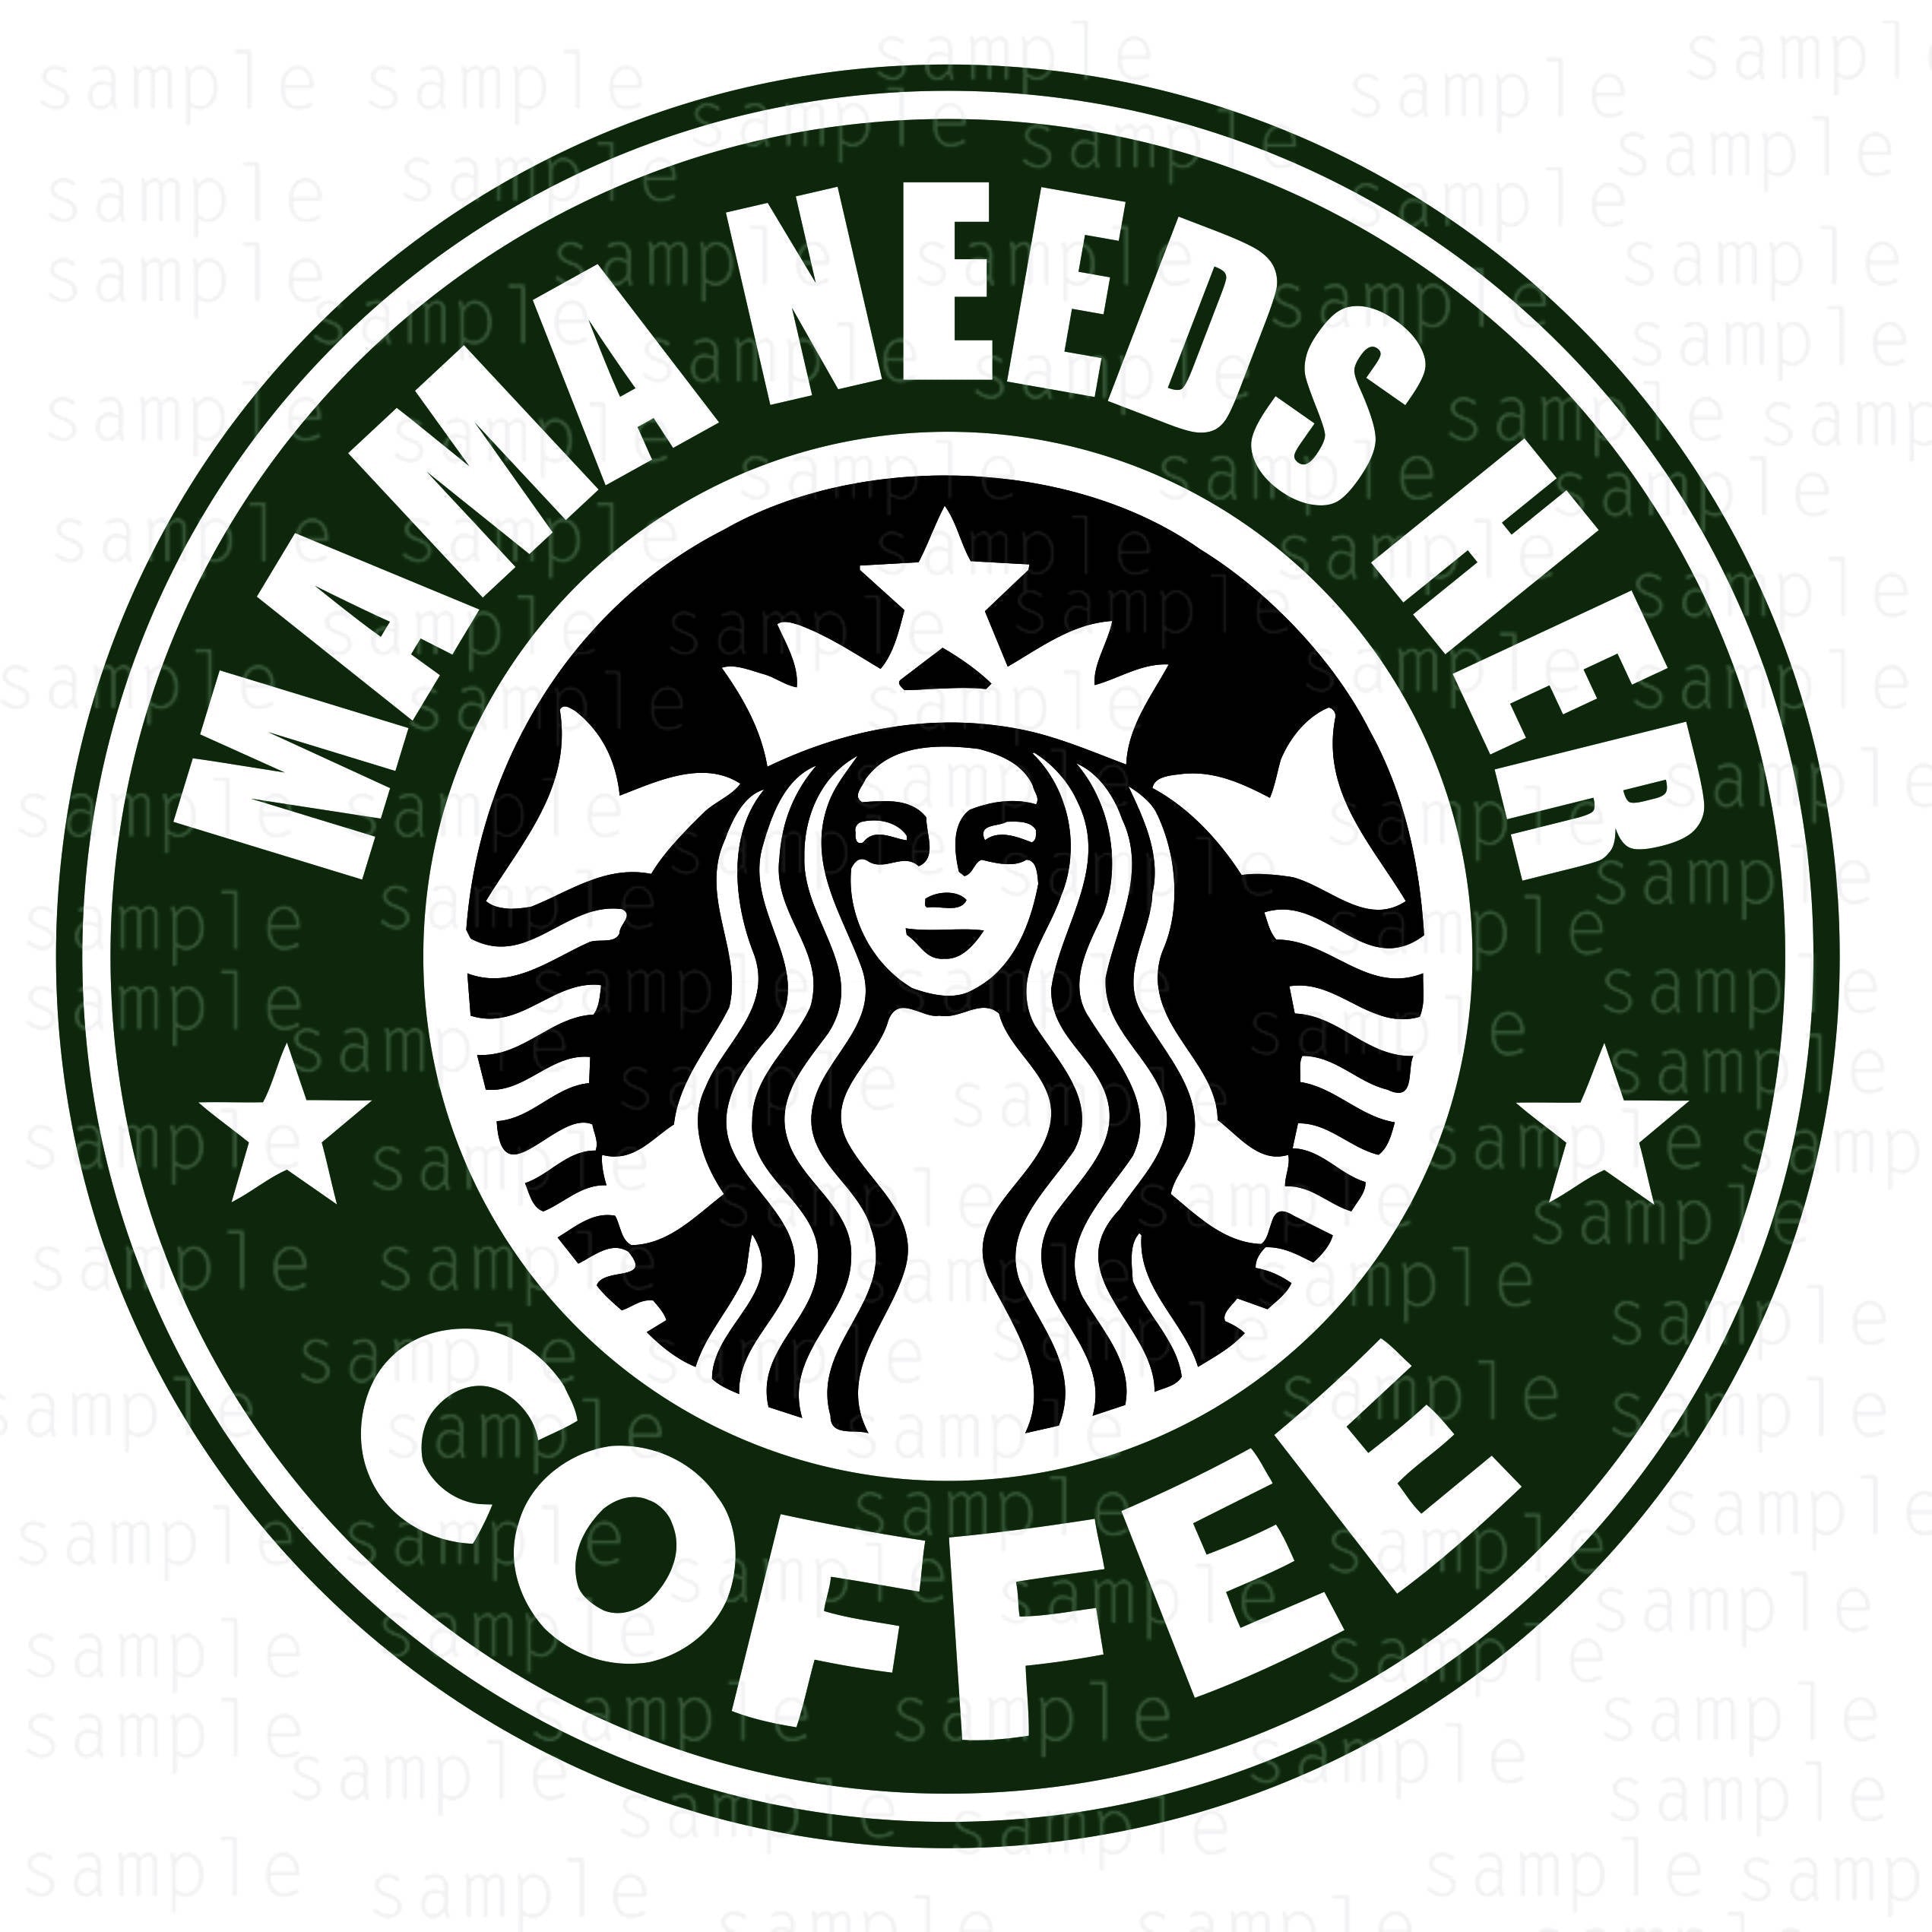 Download Mama Needs Her Coffee Starbucks Svg Coffee Svg Dxf Svg Jpg Png Coffee Time Svg Mom Life Nap Sweet Mom Pregnancy Svg My Easy Files